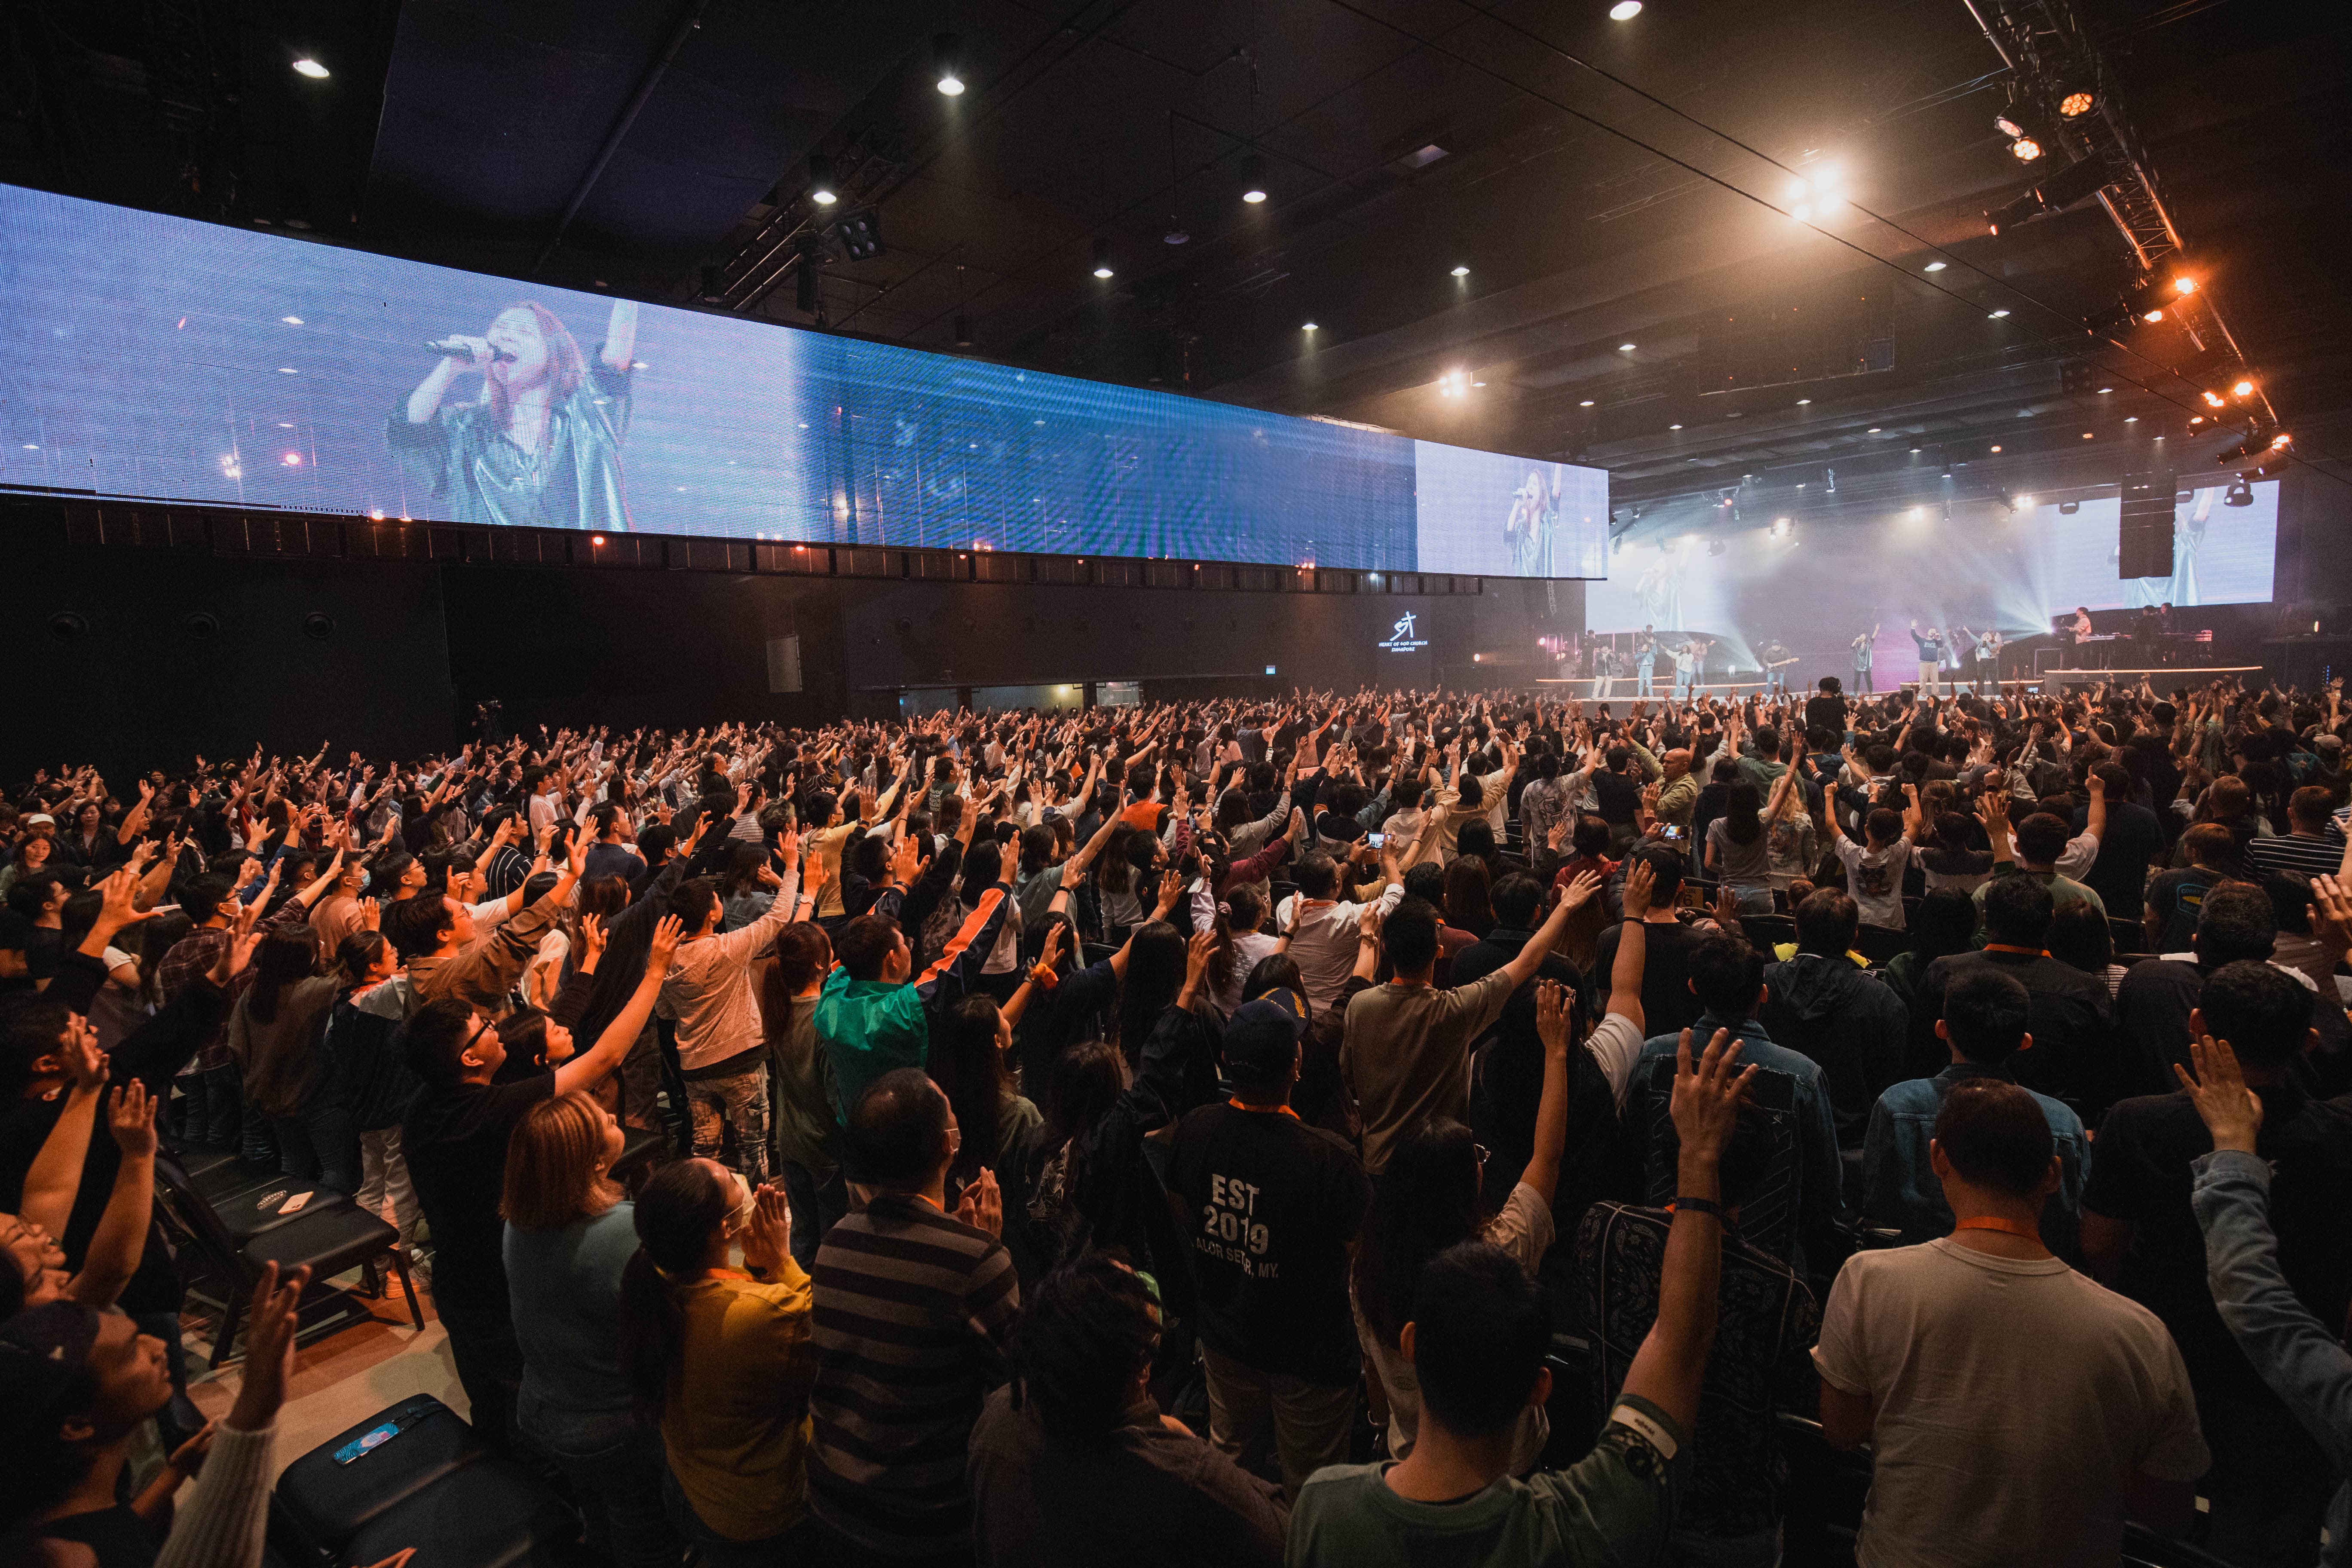 Thousands worshipping in the revival atmosphere at Heart of God Church Singapore